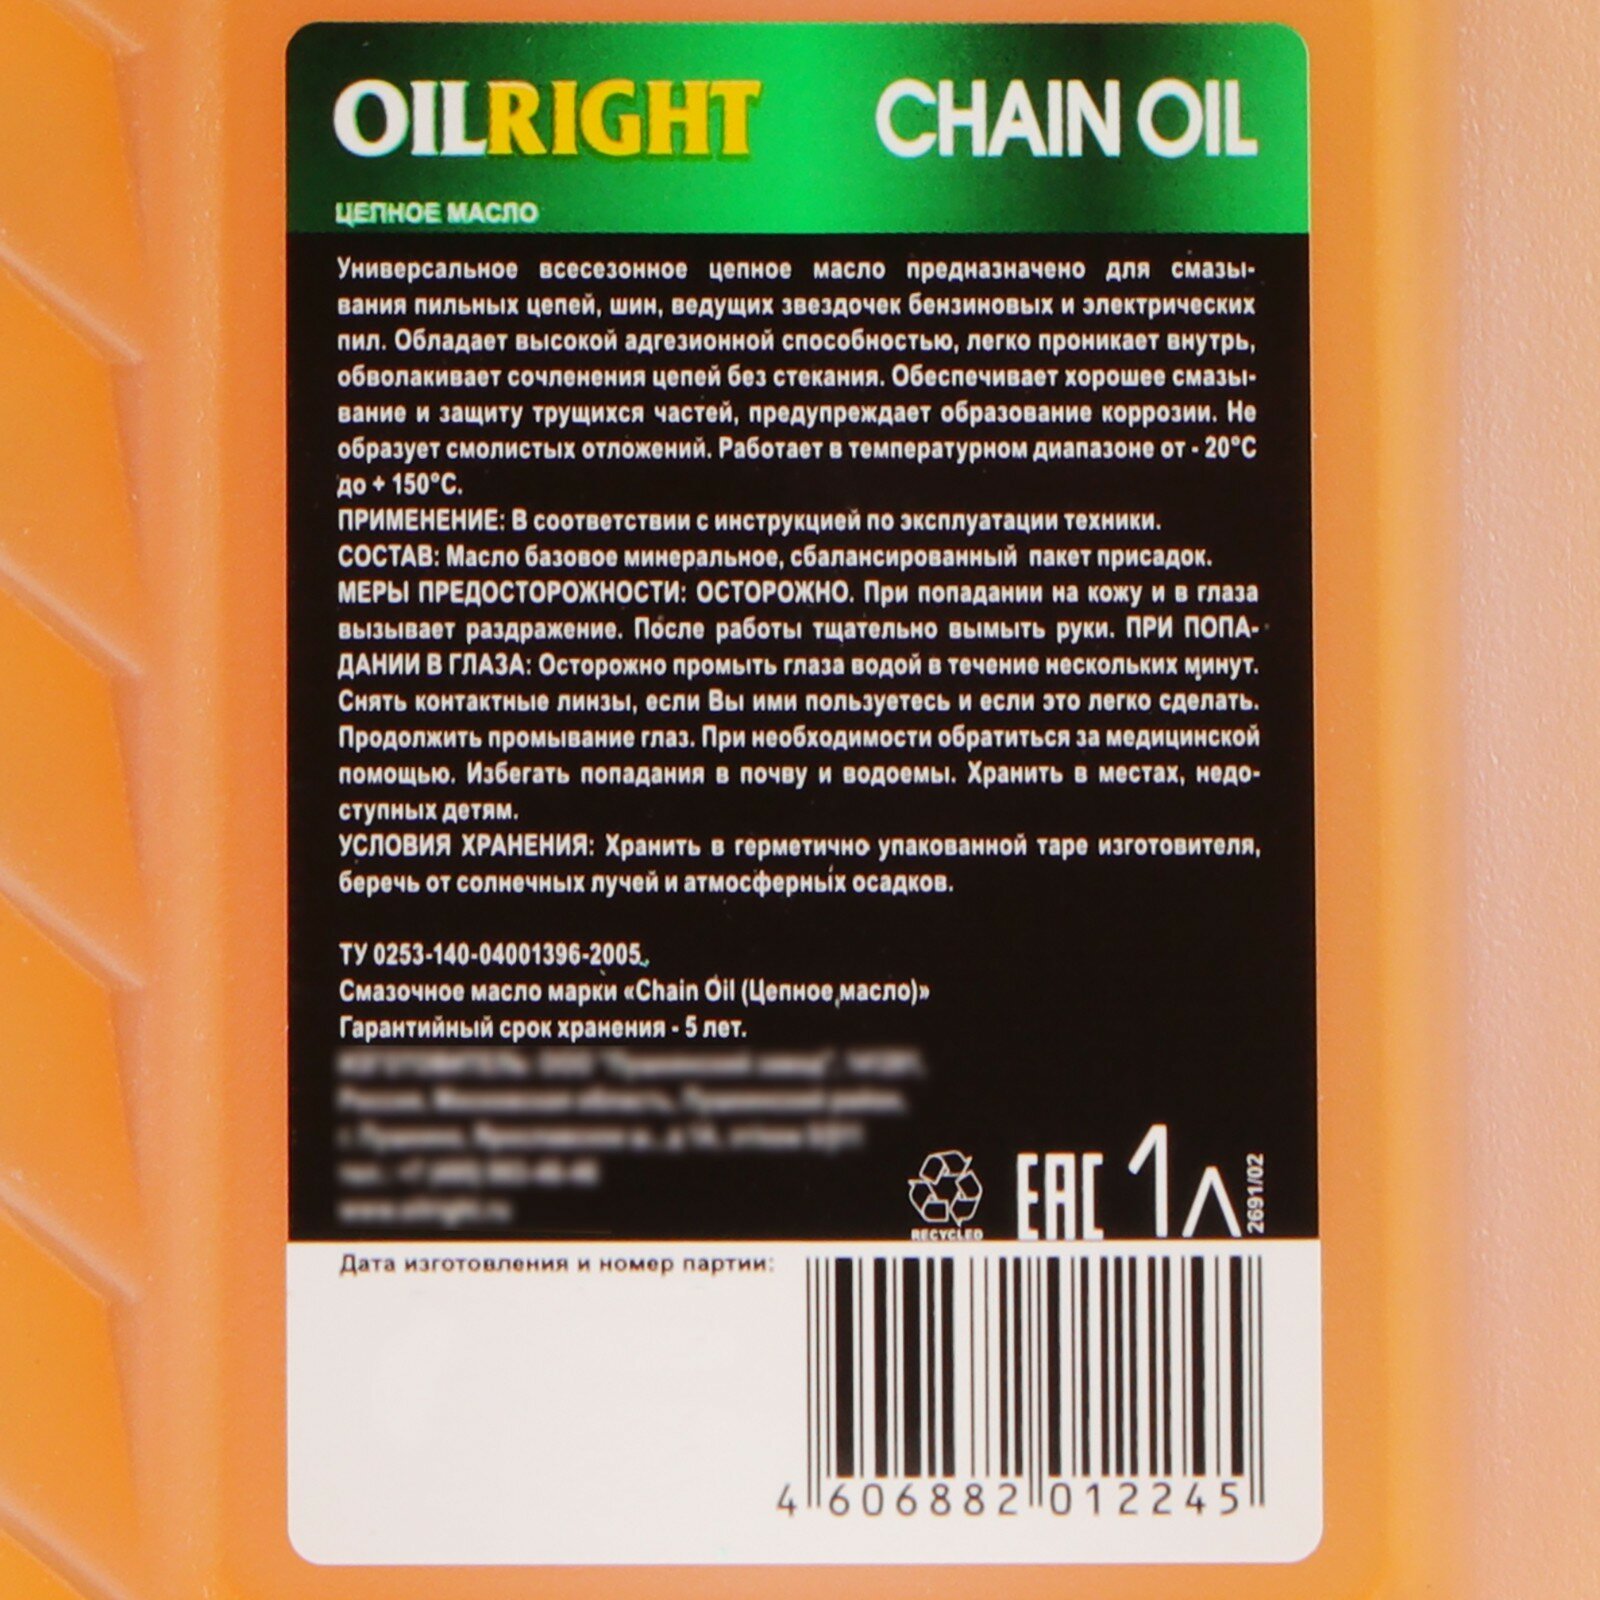 Масло дляазки цепи OILRIGHT CHAIN OIL 1 л